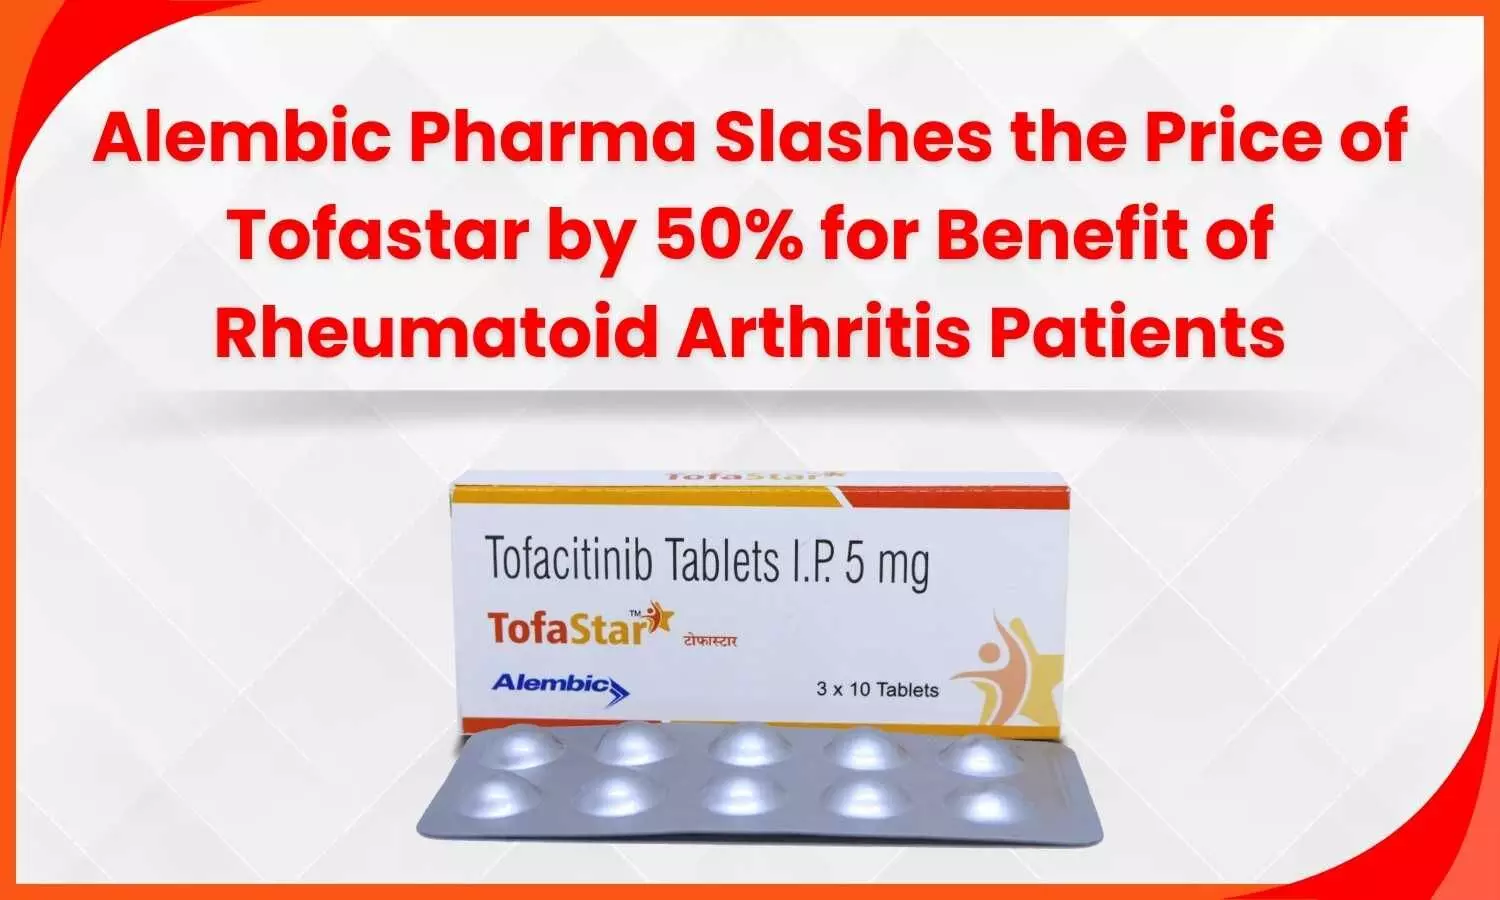 Alembic Pharma Slashes the Price of Tofastar by 50% for Benefit of Rheumatoid Arthritis Patients